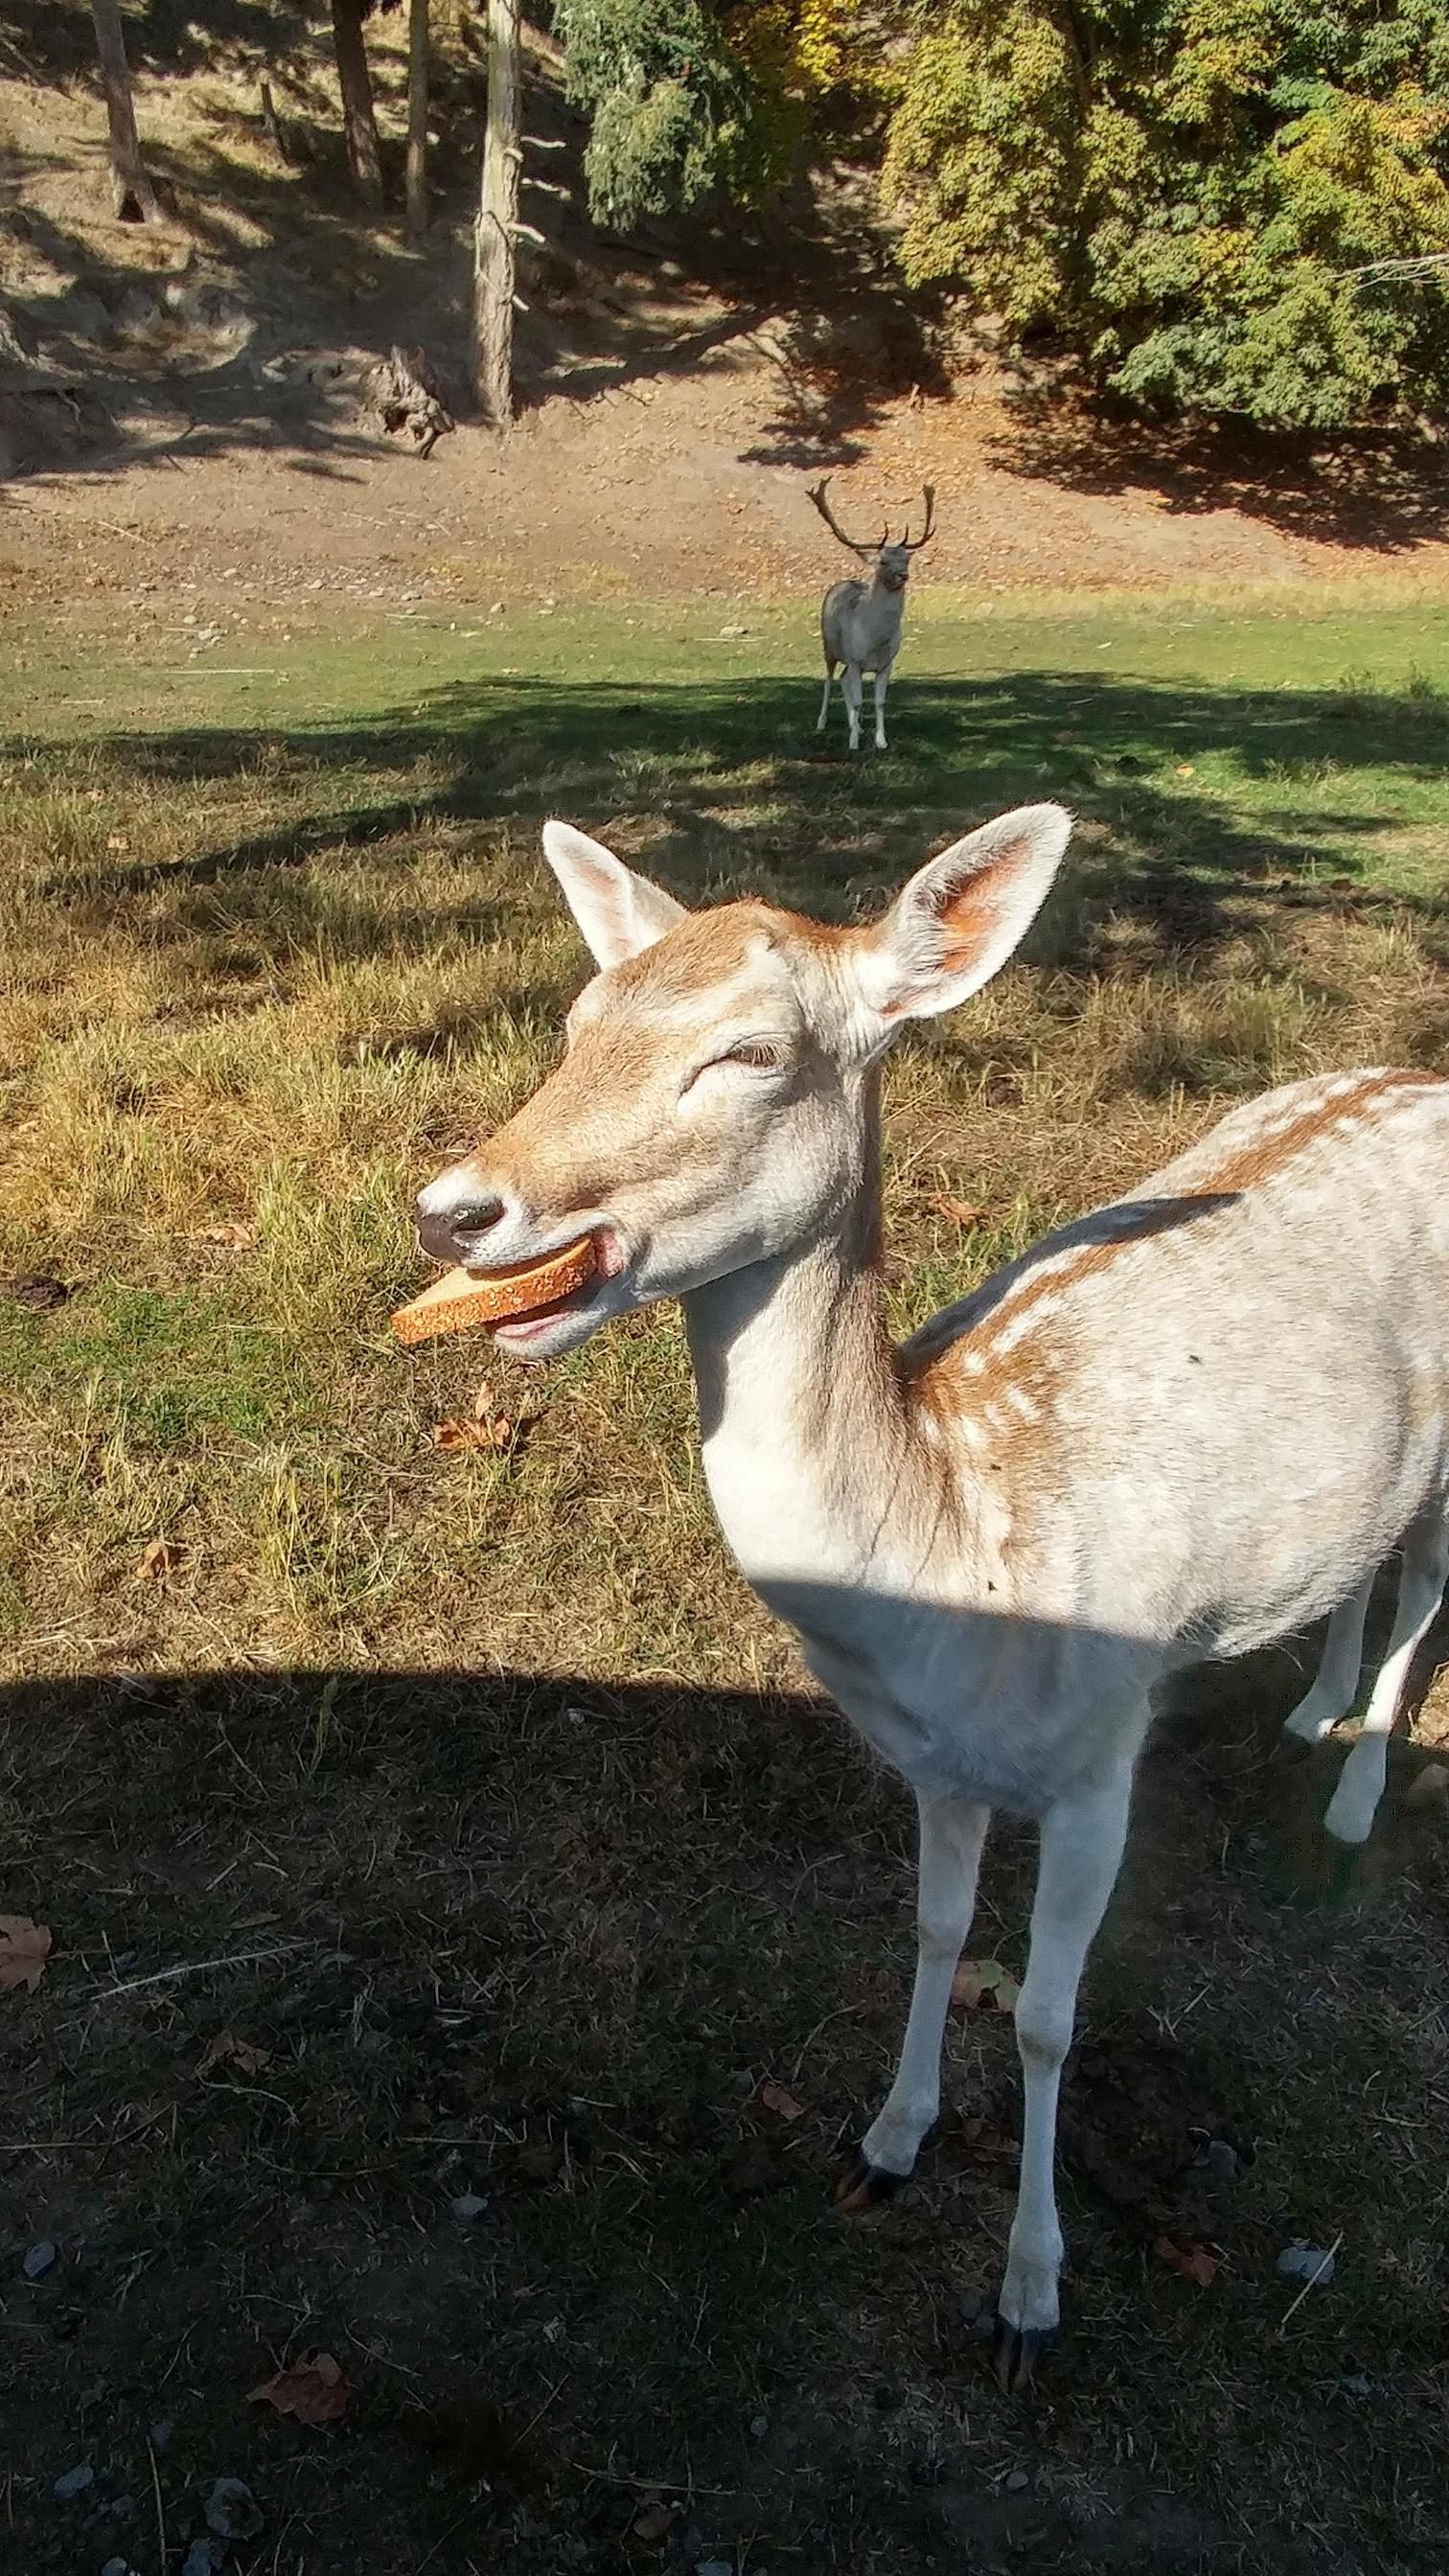 I gave this deer a piece of bread and I think it made his day.